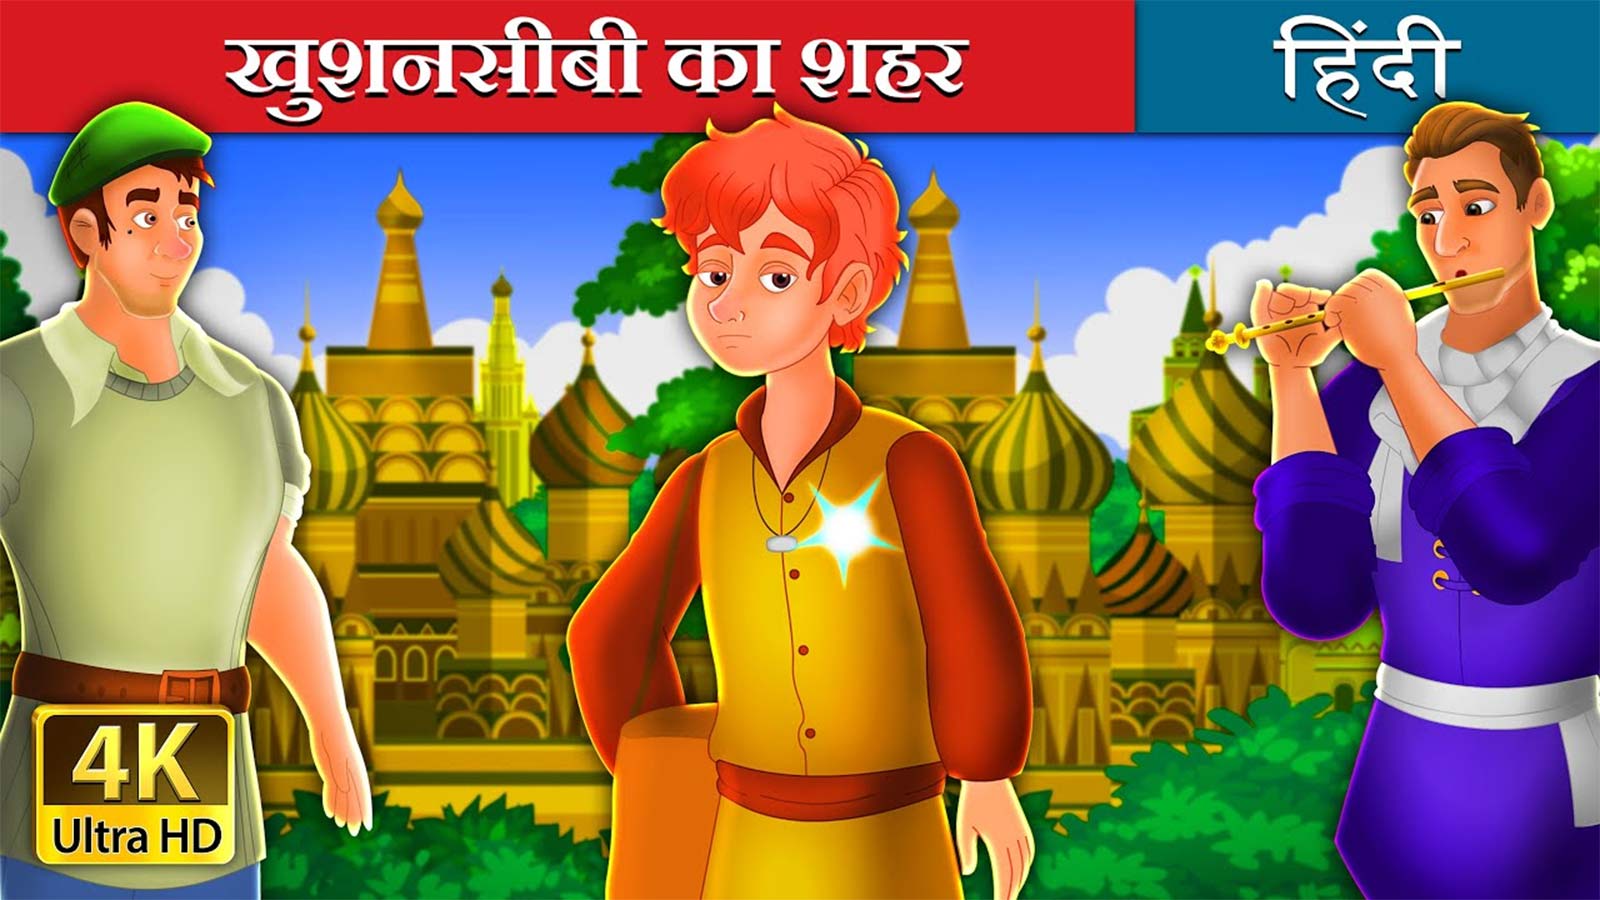 Kids Best Story 'खुशनसीबी का शहर | The City of Fortune Story' - Hindi Tales  For Kids | Entertainment - Times of India Videos